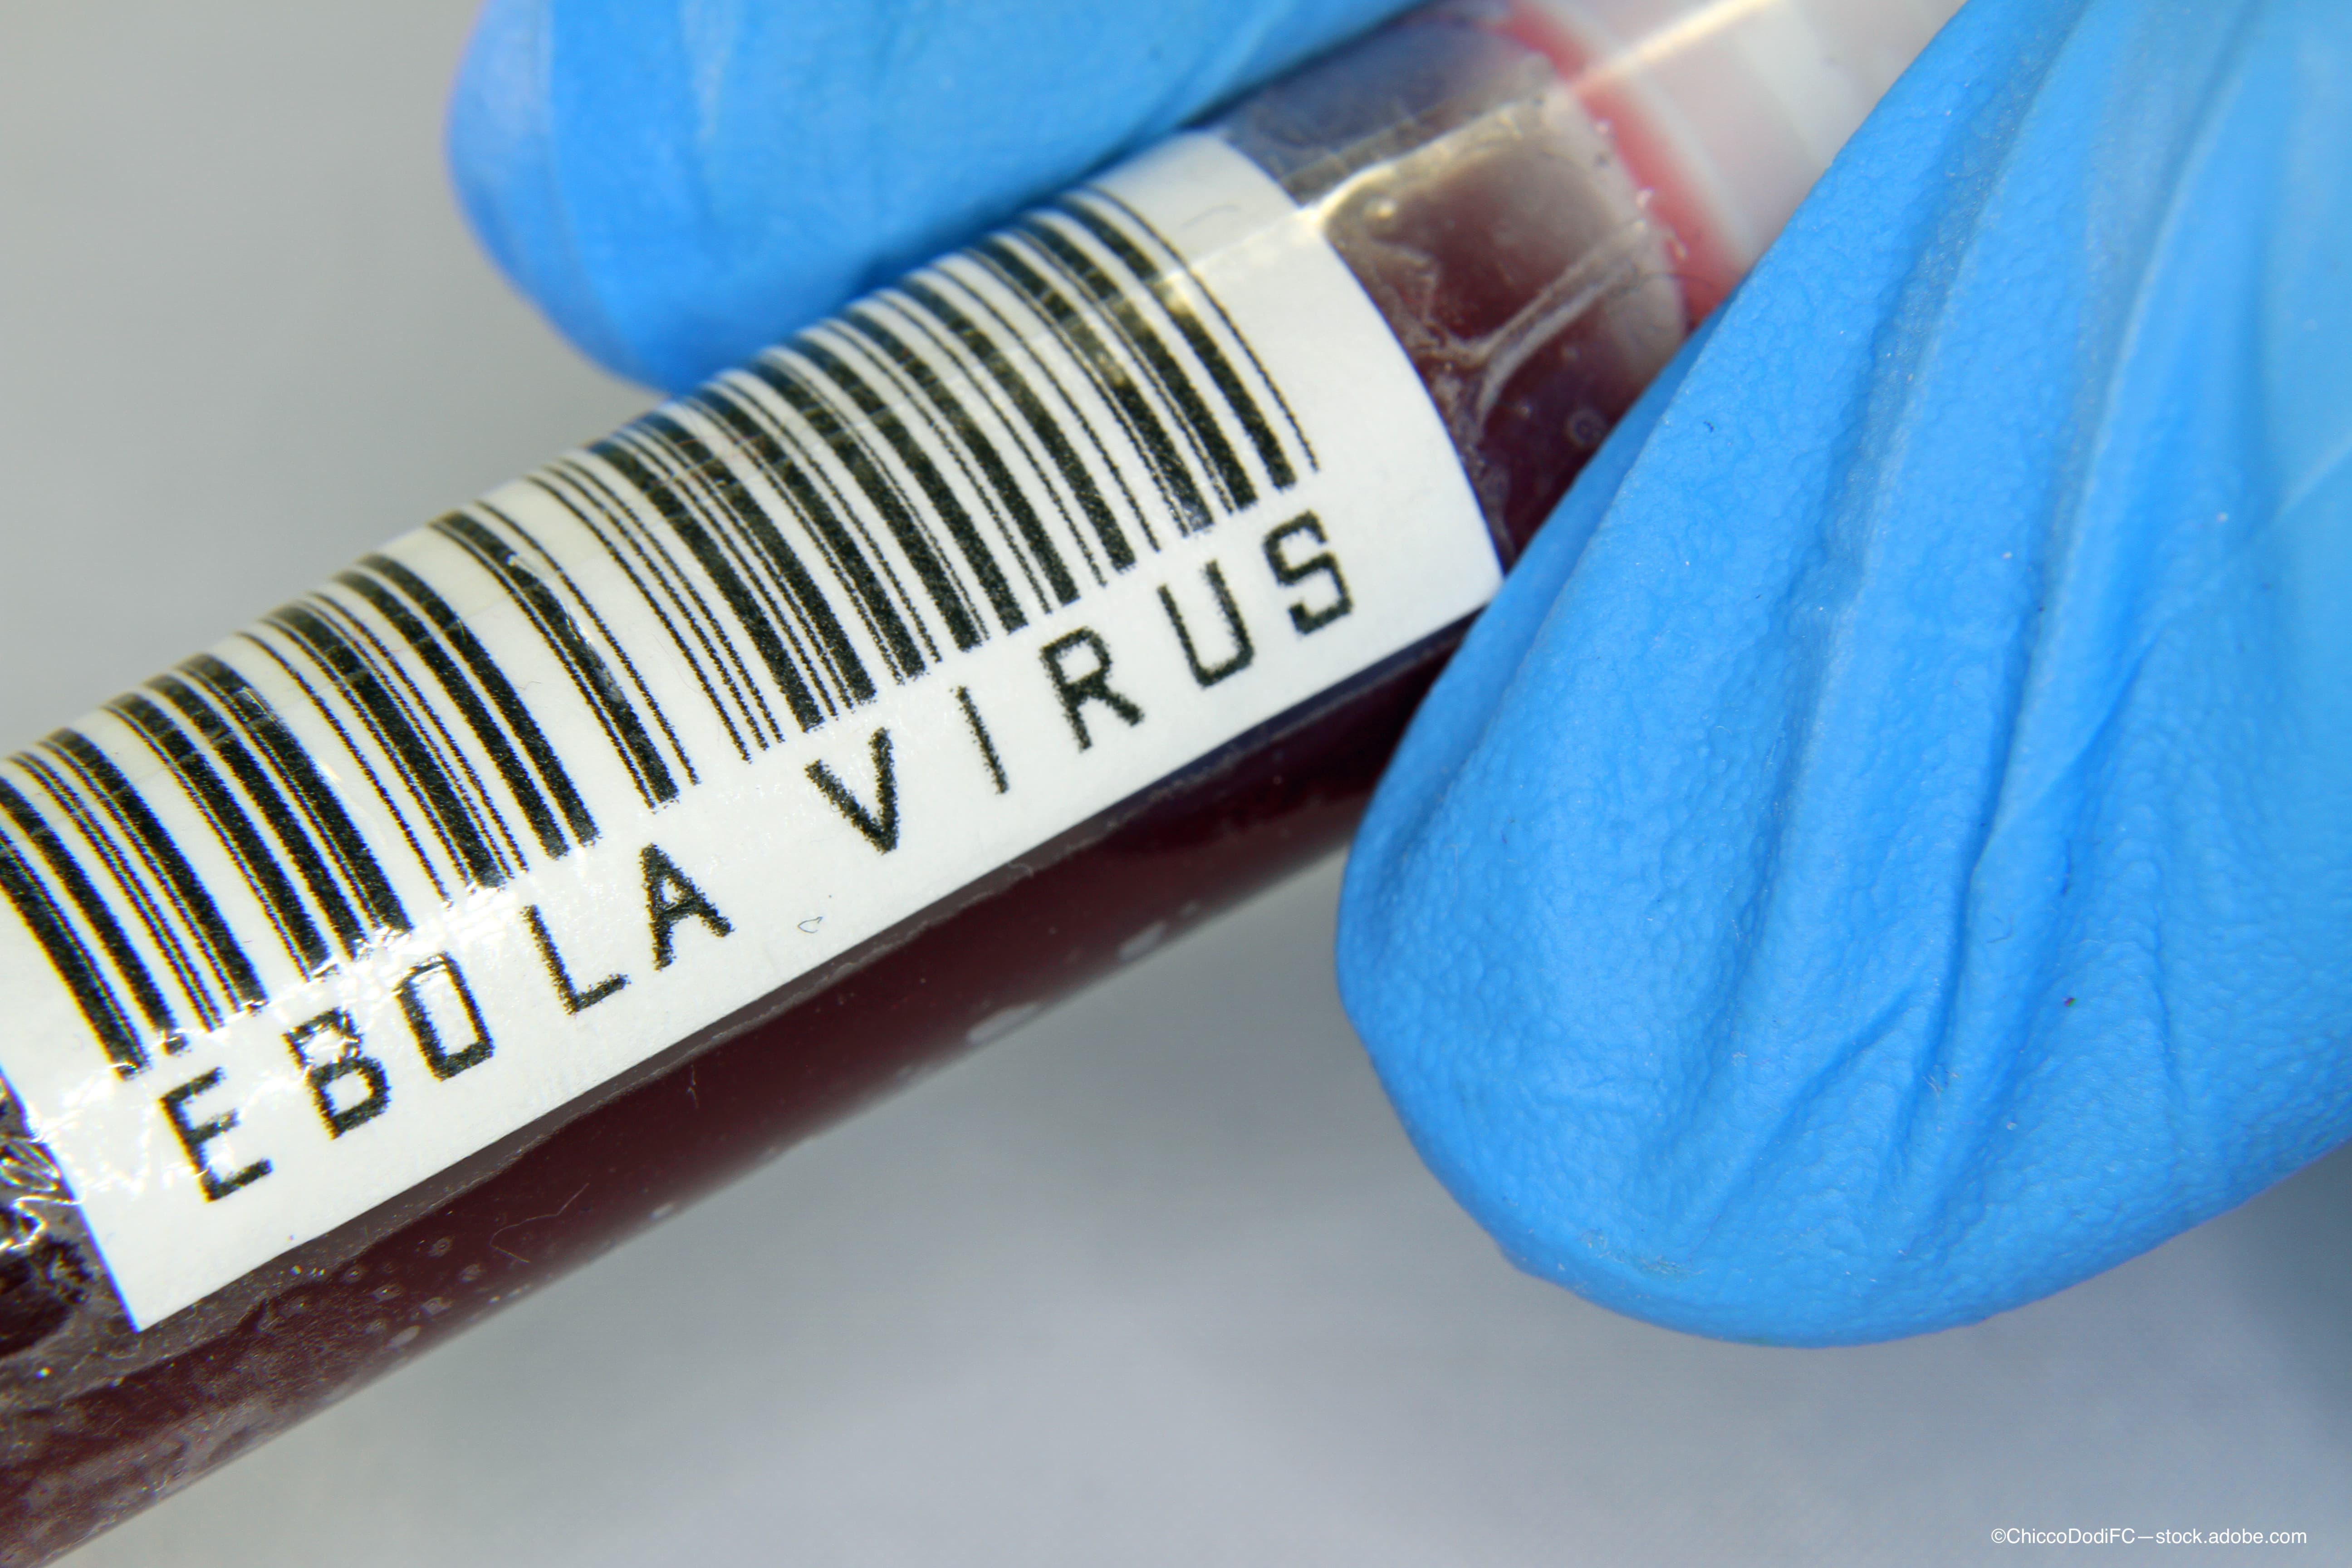 Retinal cells may house Ebola, other viruses